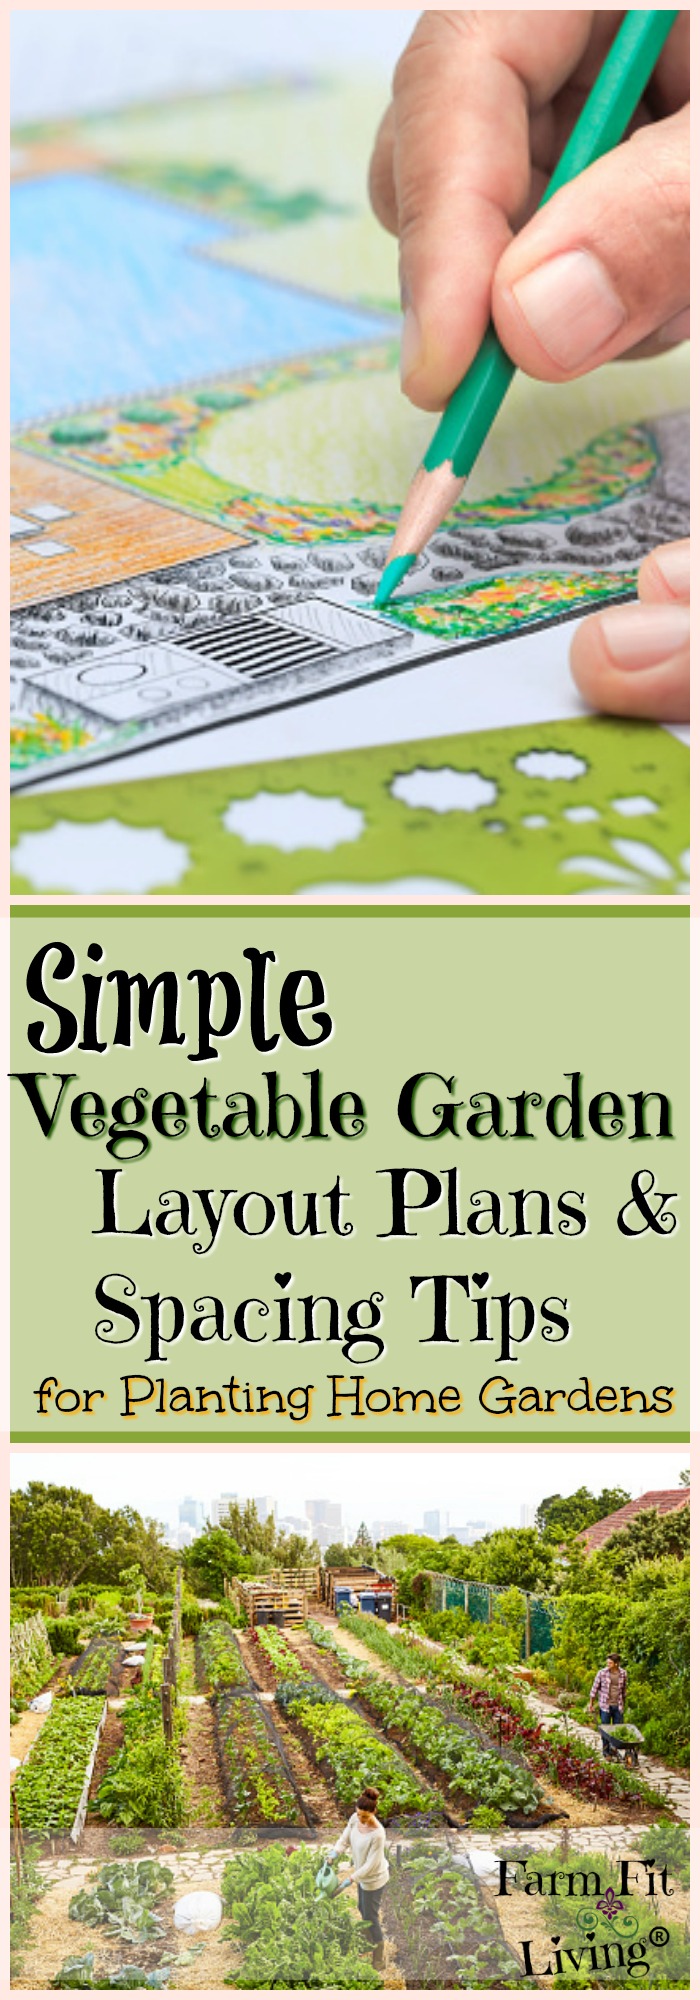 Simple Vegetable Garden Layout Plans and Spacing Tips